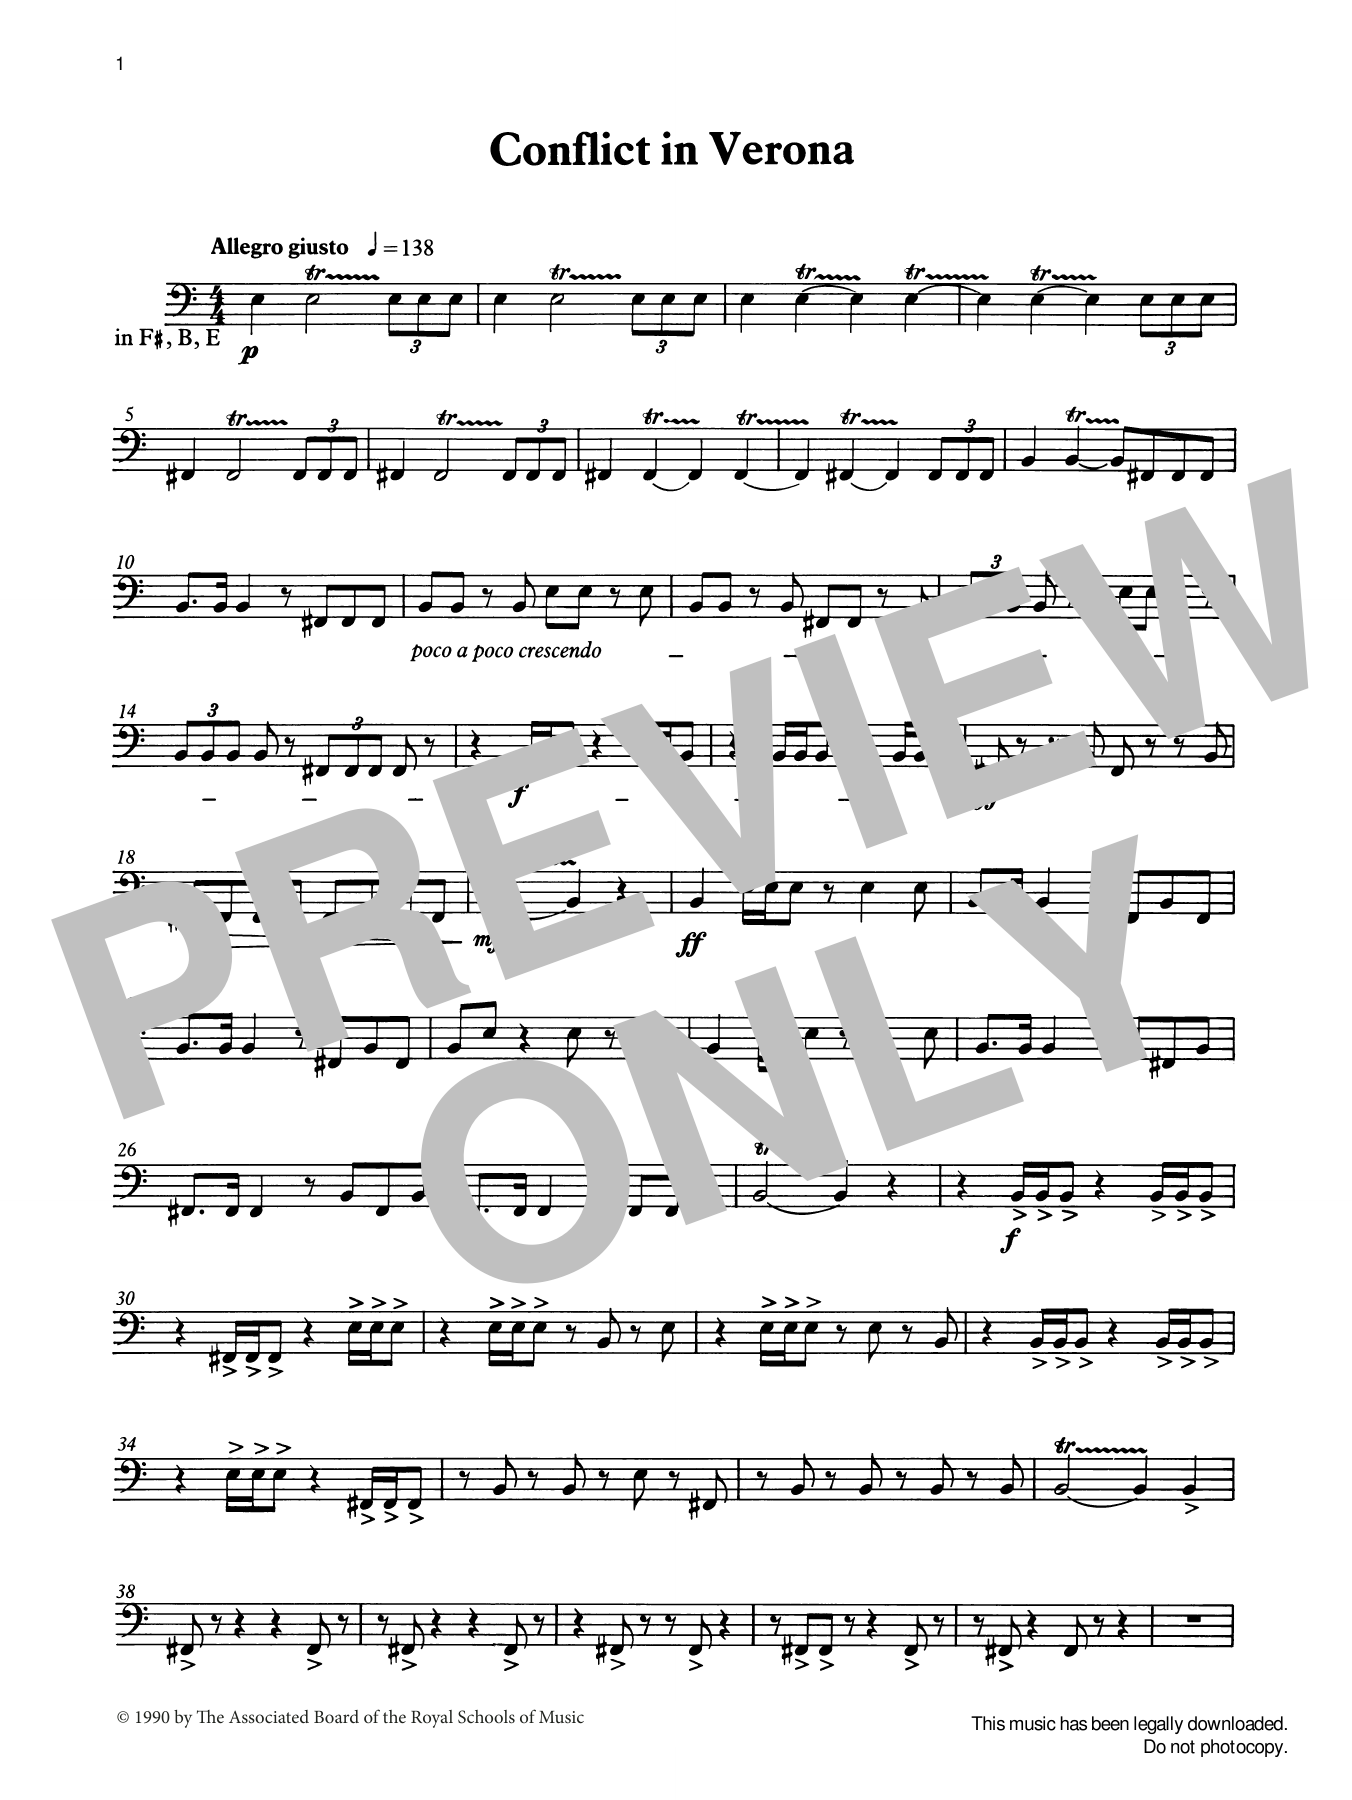 Download Ian Wright Conflict in Verona from Graded Music fo Sheet Music